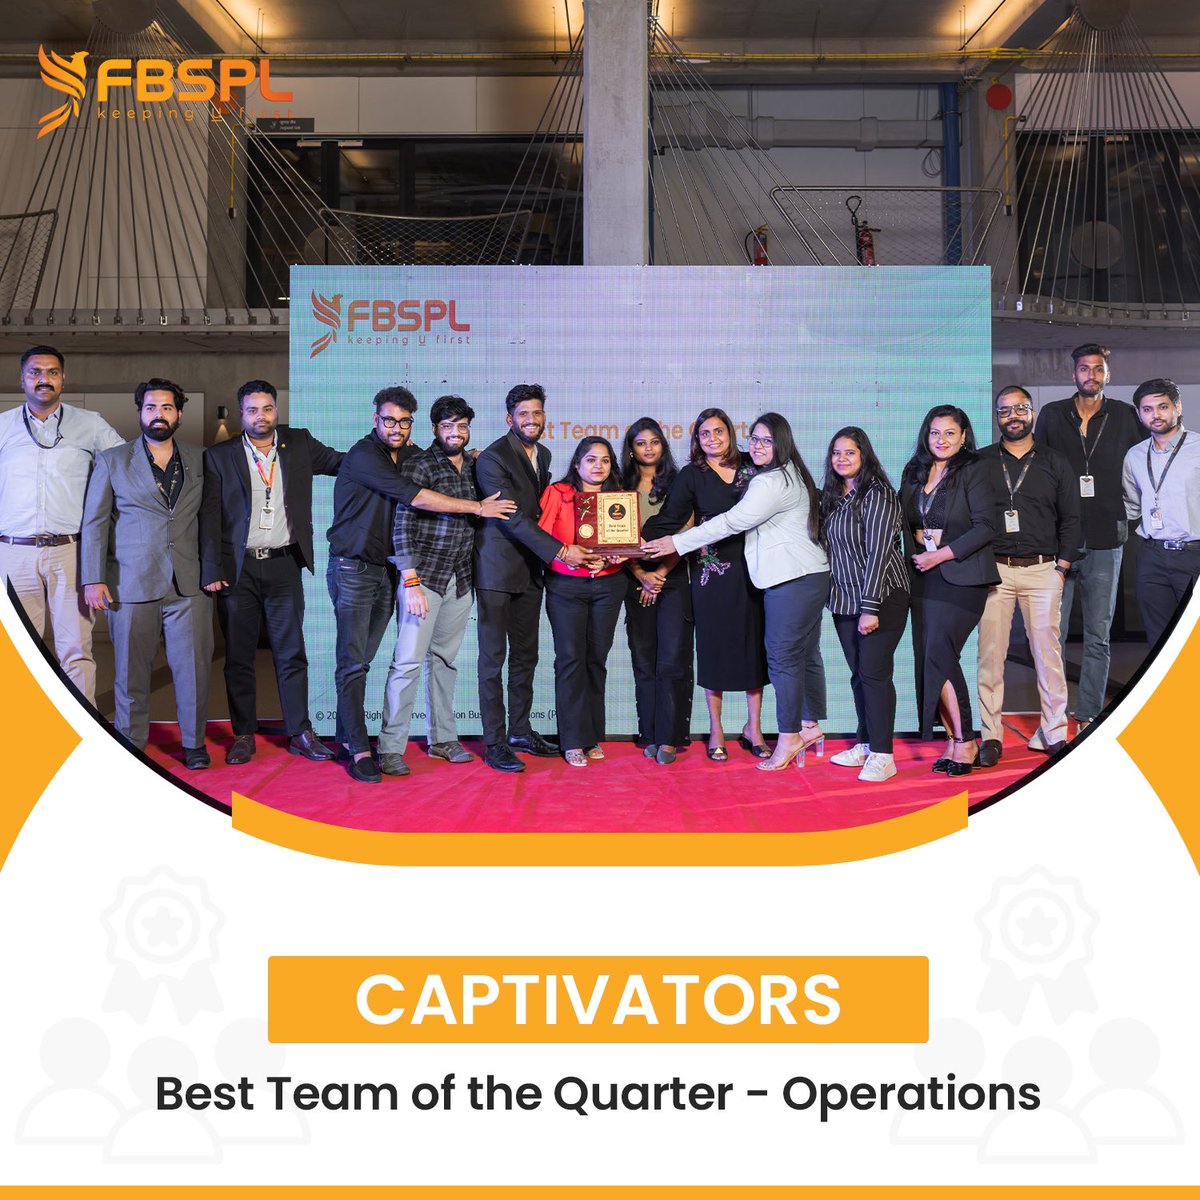 A good team helps us go above and beyond, and team spirit makes everything happen. 
Heartiest congratulations to our Best Team of the Quarter - Captivators.
 
#FBSPL #bestteam #teamofthequarter #teamspirit #keepingUfirst #FBSPLteam #rewards #awards #townhall